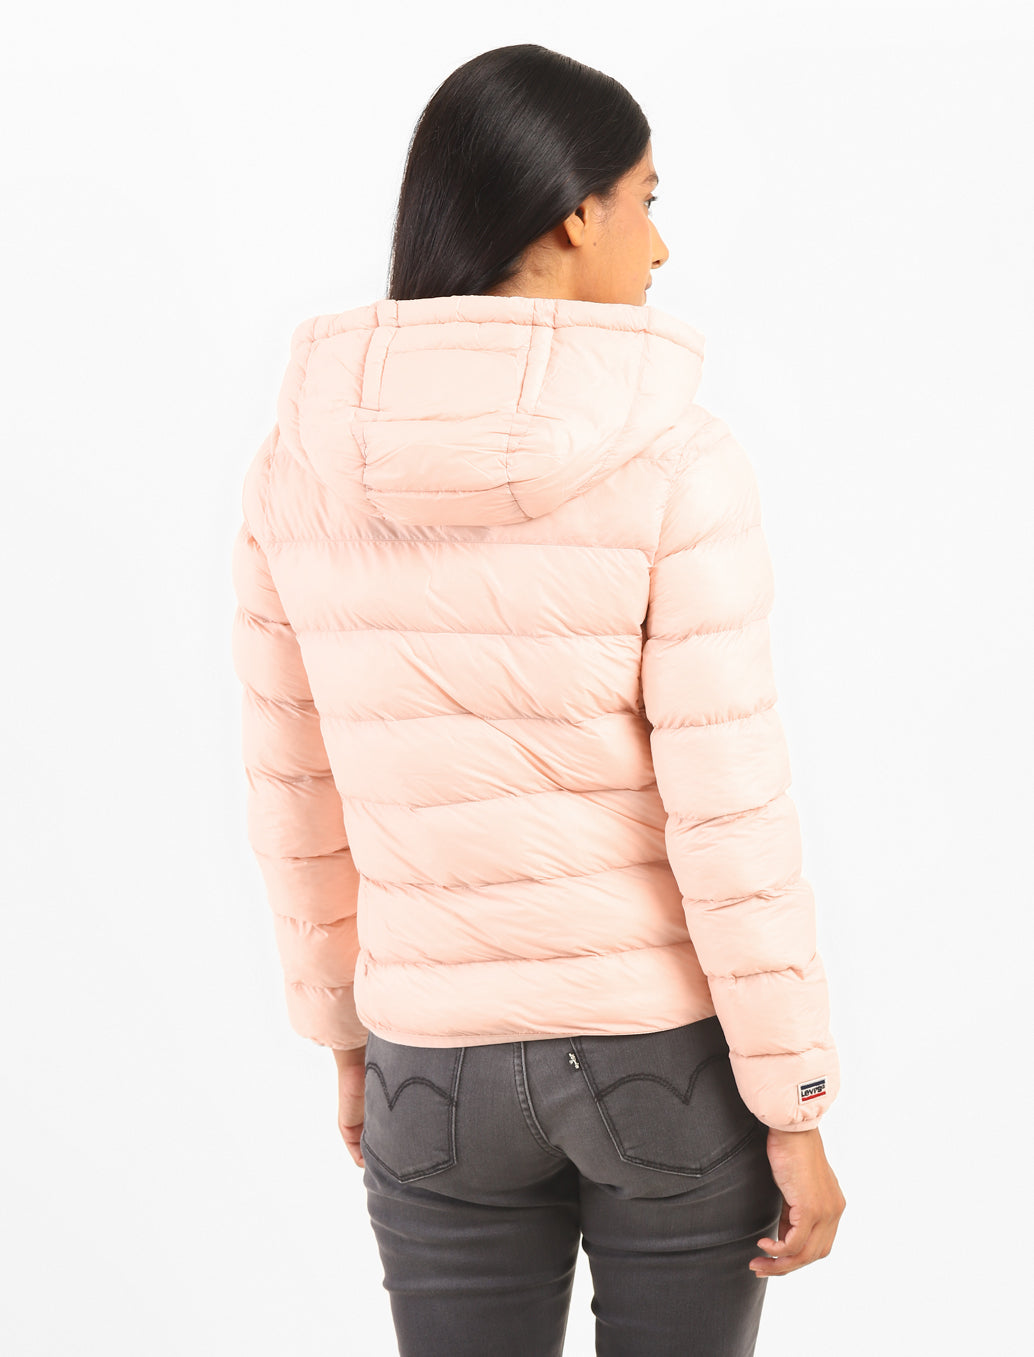 Women's Solid Hooded Jackets